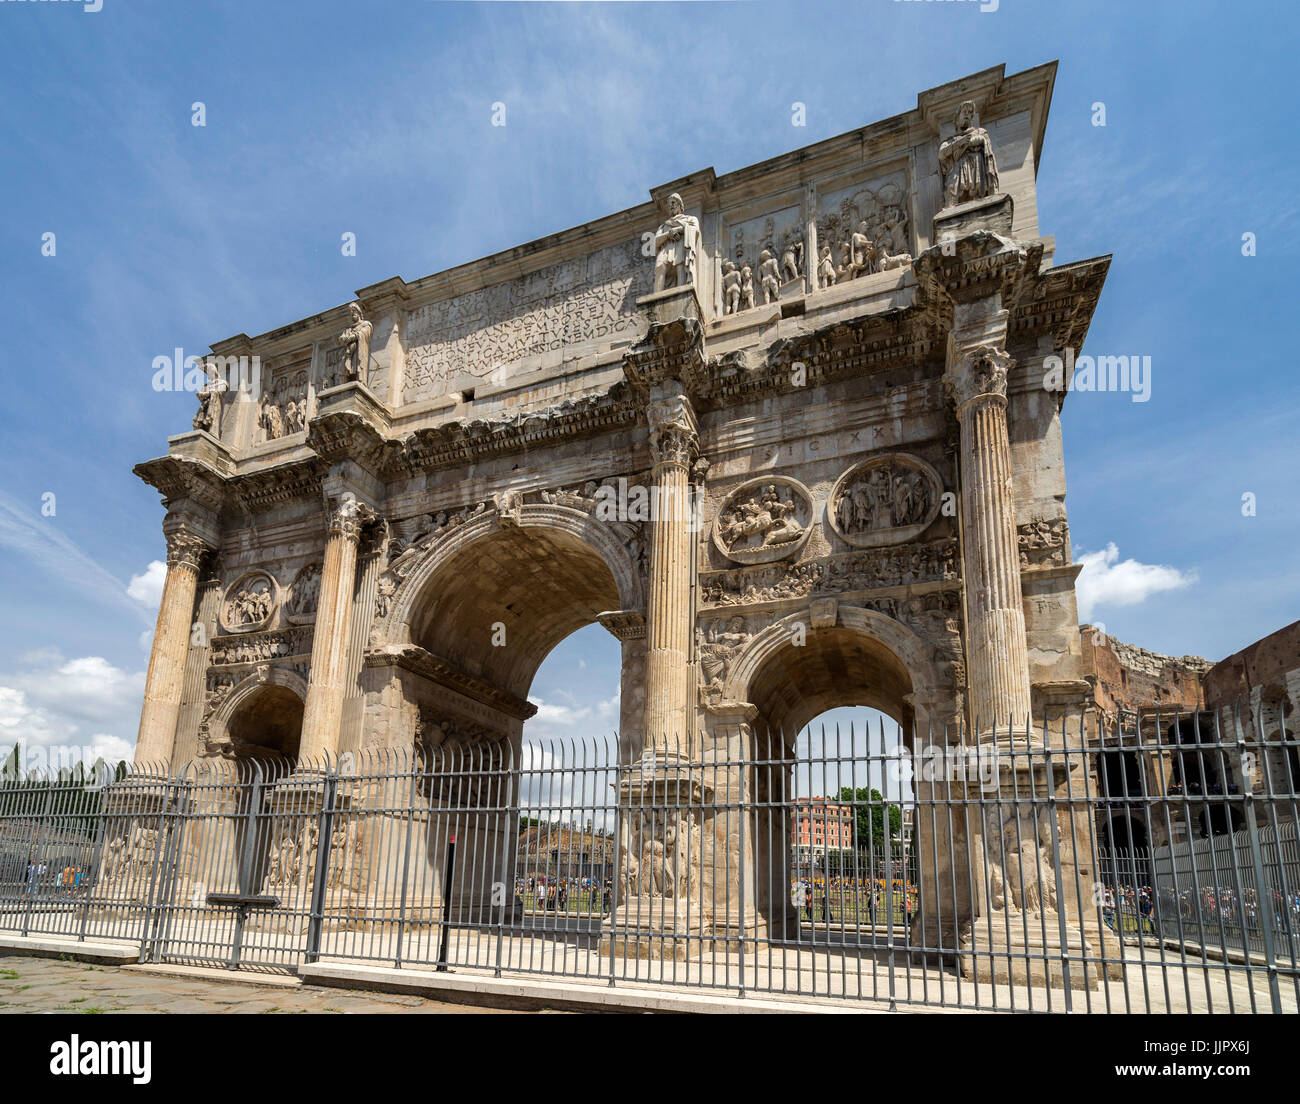 The Arch of Constantine (Arco di Costantino) - the 'triumphal arch' in Rome, Italy. Stock Photo